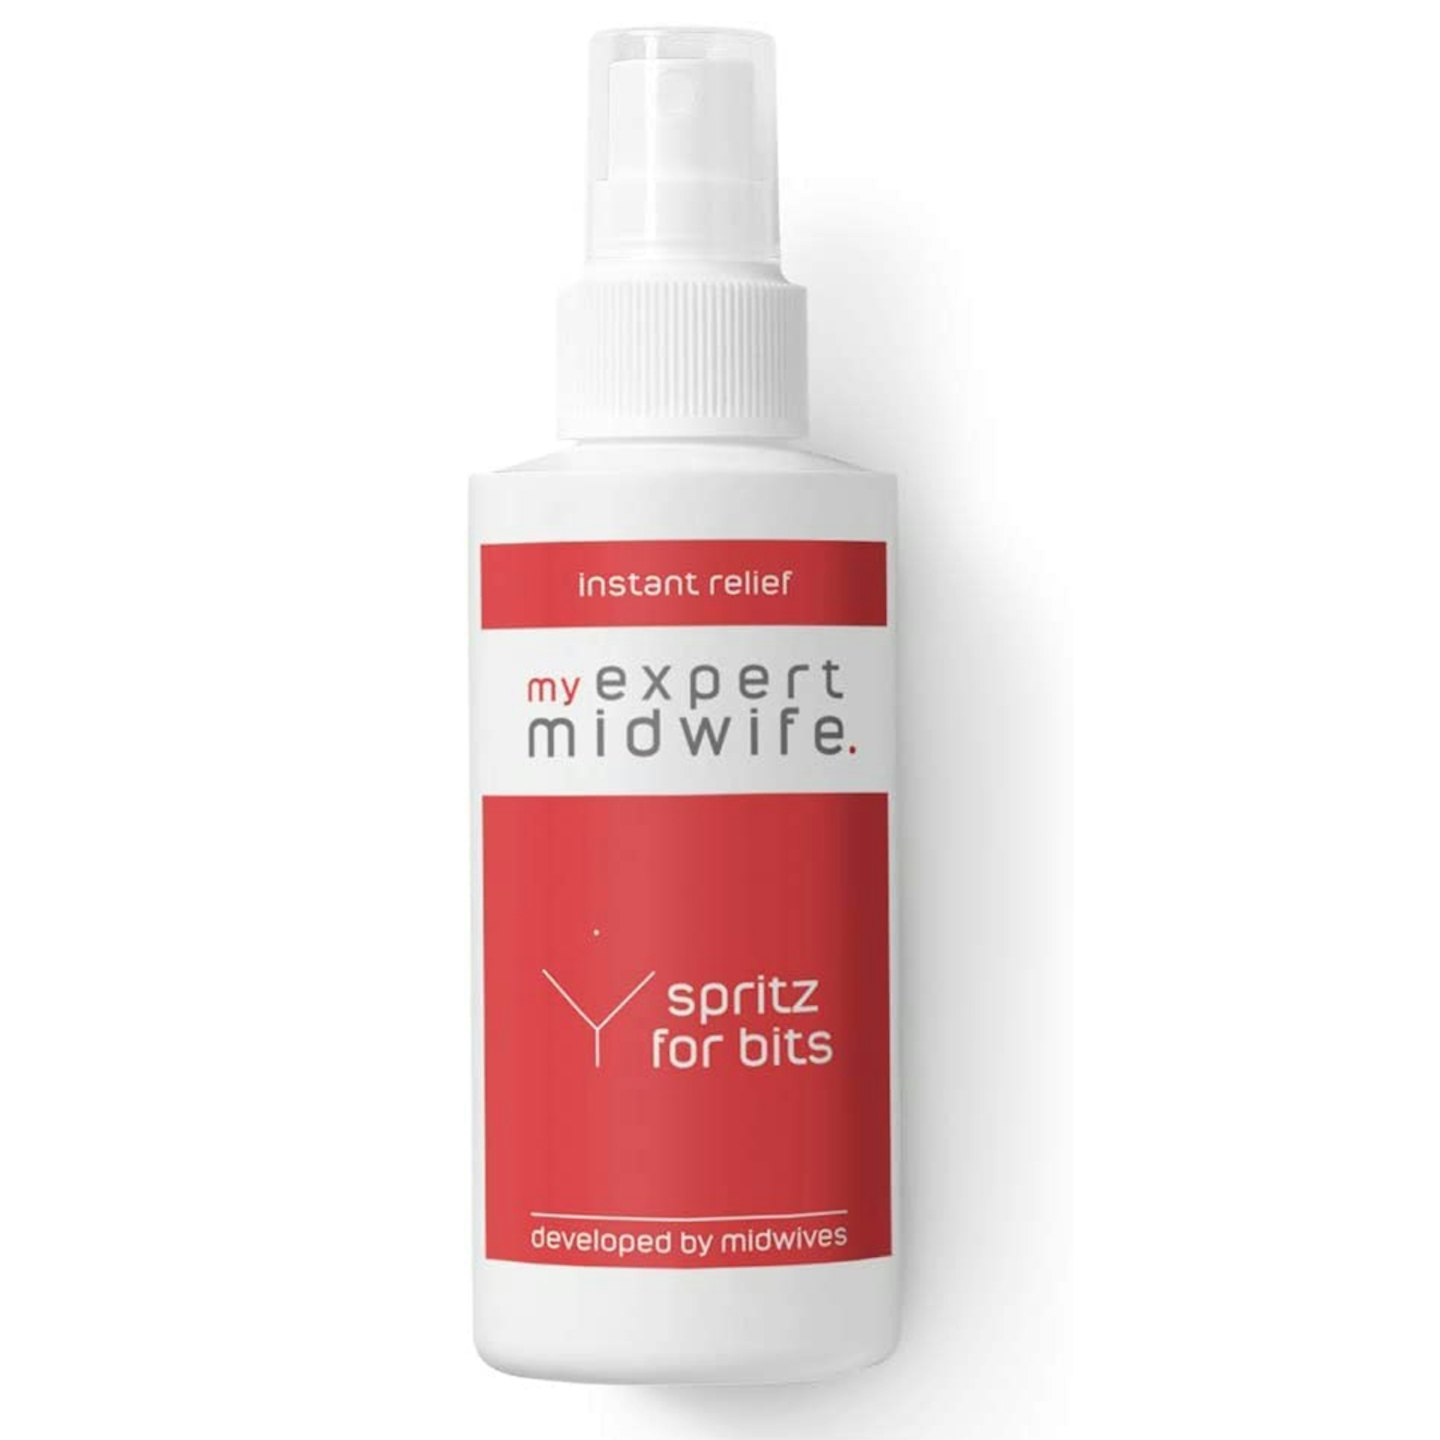 My Expert Midwife Spritz for Bits